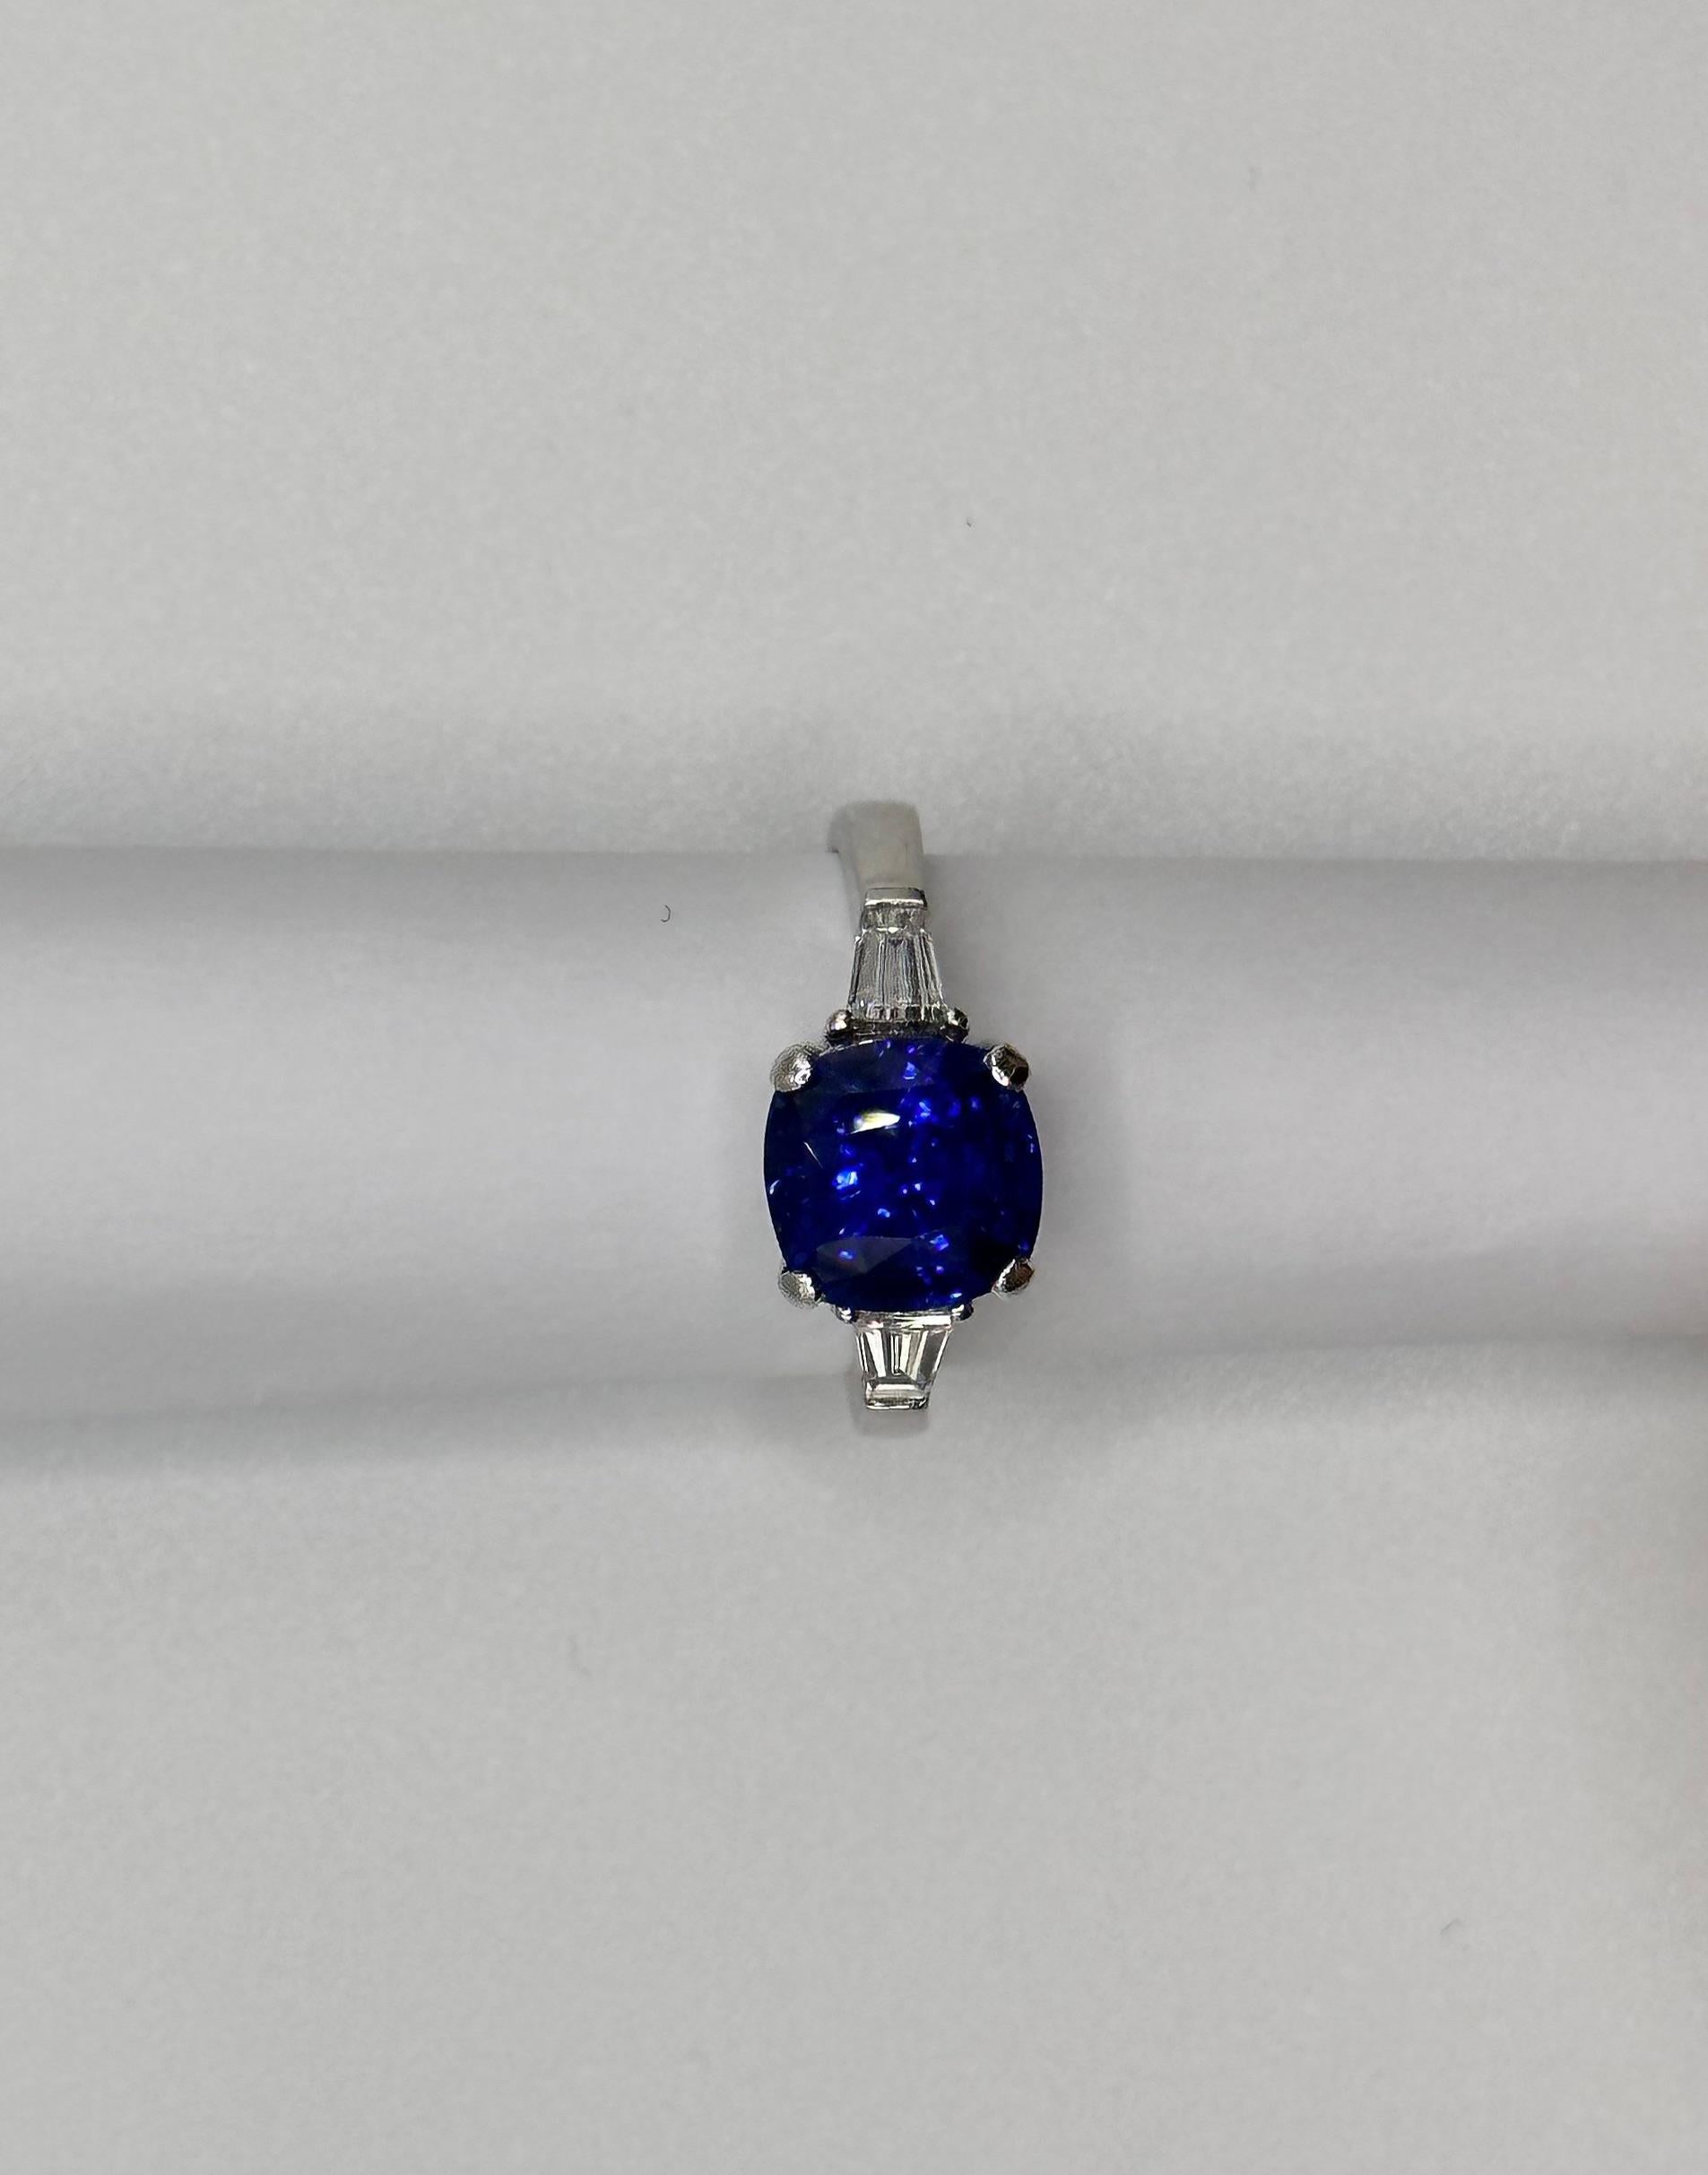 Ring with a 4.66ct cushion-cut Sri Lankan sapphire and two 0.41ct taype-cut diamonds in 18K white gold.

It has two laboratory certificates IGE of Spain and GCS England.

Product Details
↣ Jewelry Type - Rings
↣ Style - Classic
↣ Jewelry Main